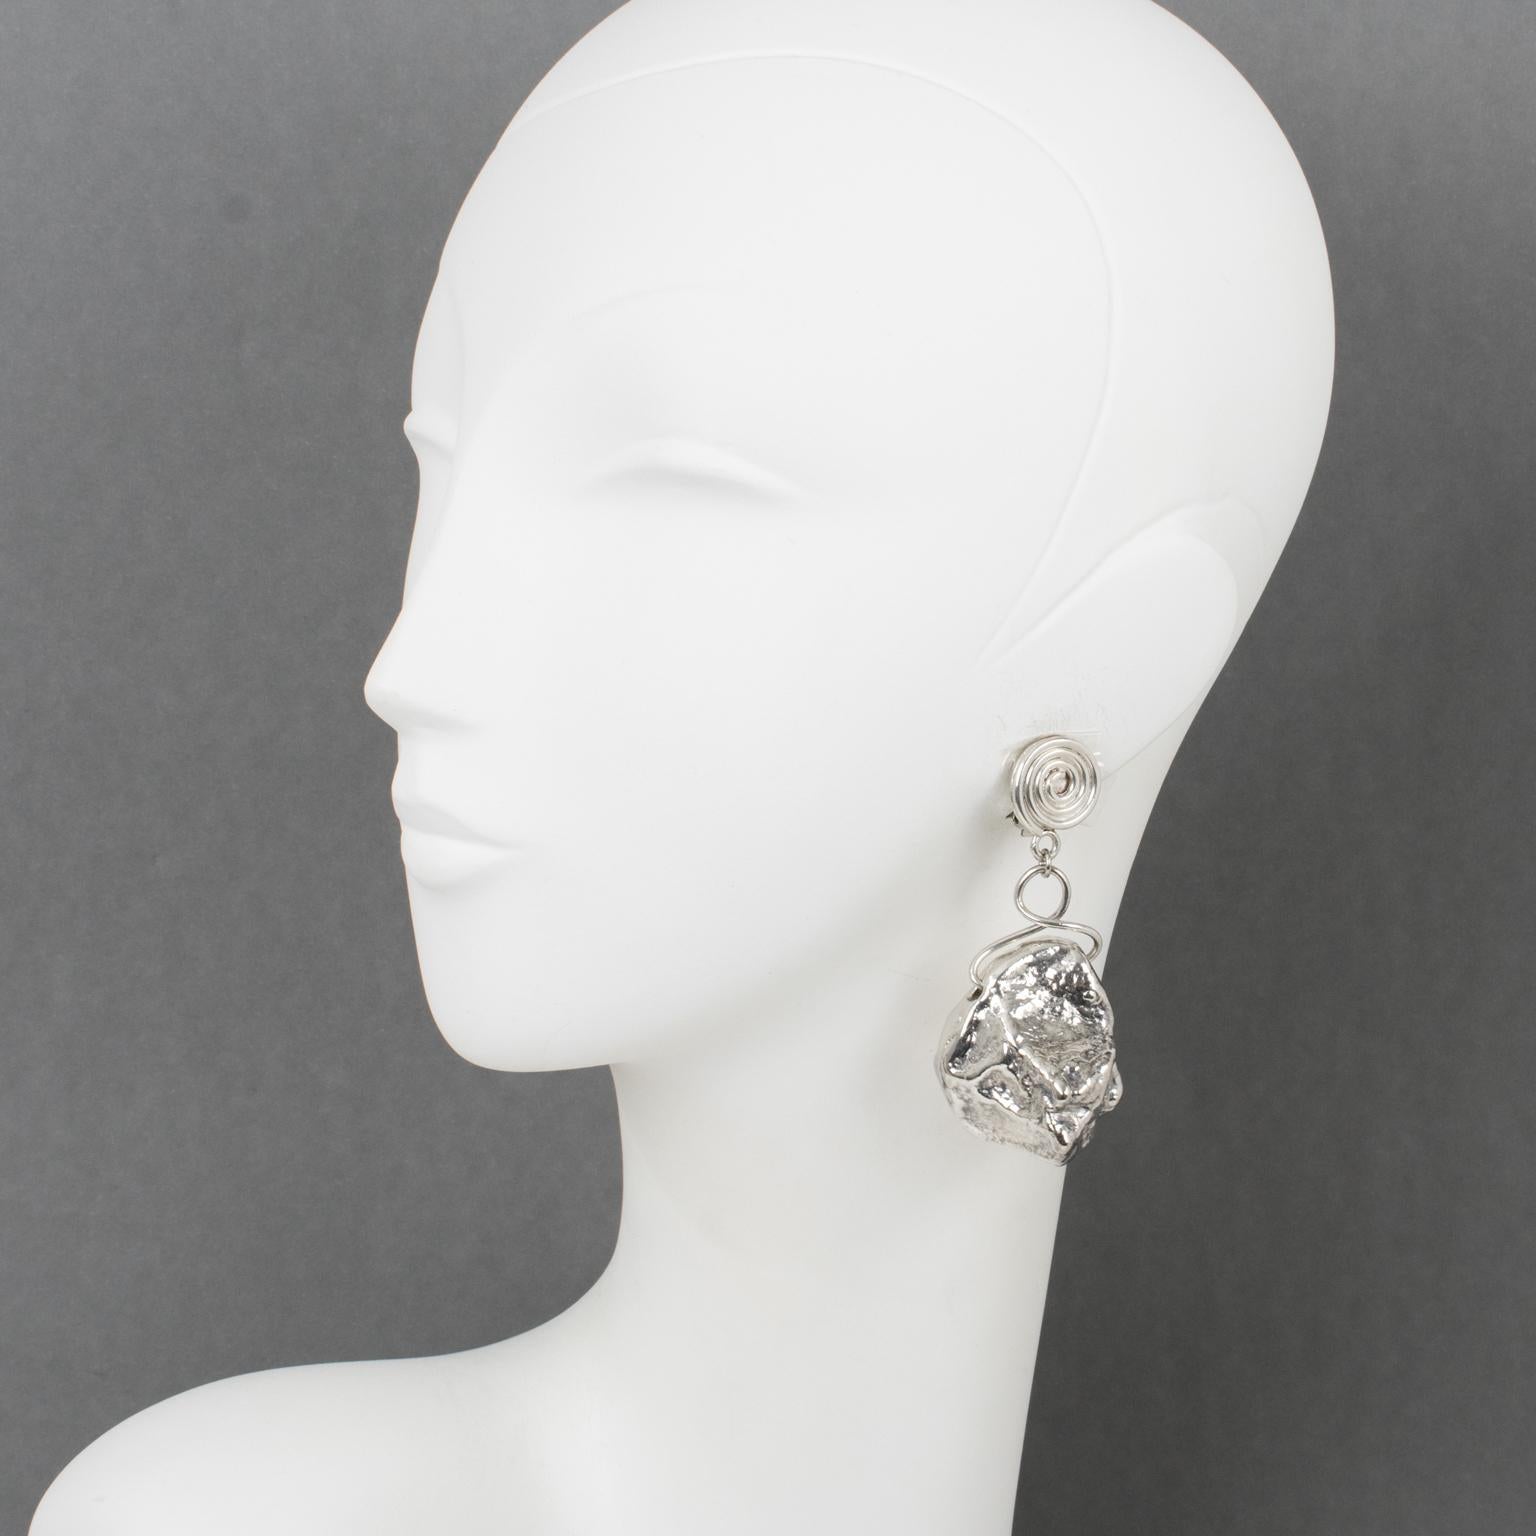 These stunning dangling clip-on earrings feature a brutalist design with an oversized nugget-shaped drop in silver plate metal. The fastening elements have a silver plate spiral design. There is no visible maker's mark.
Measurements: 1.38 in wide